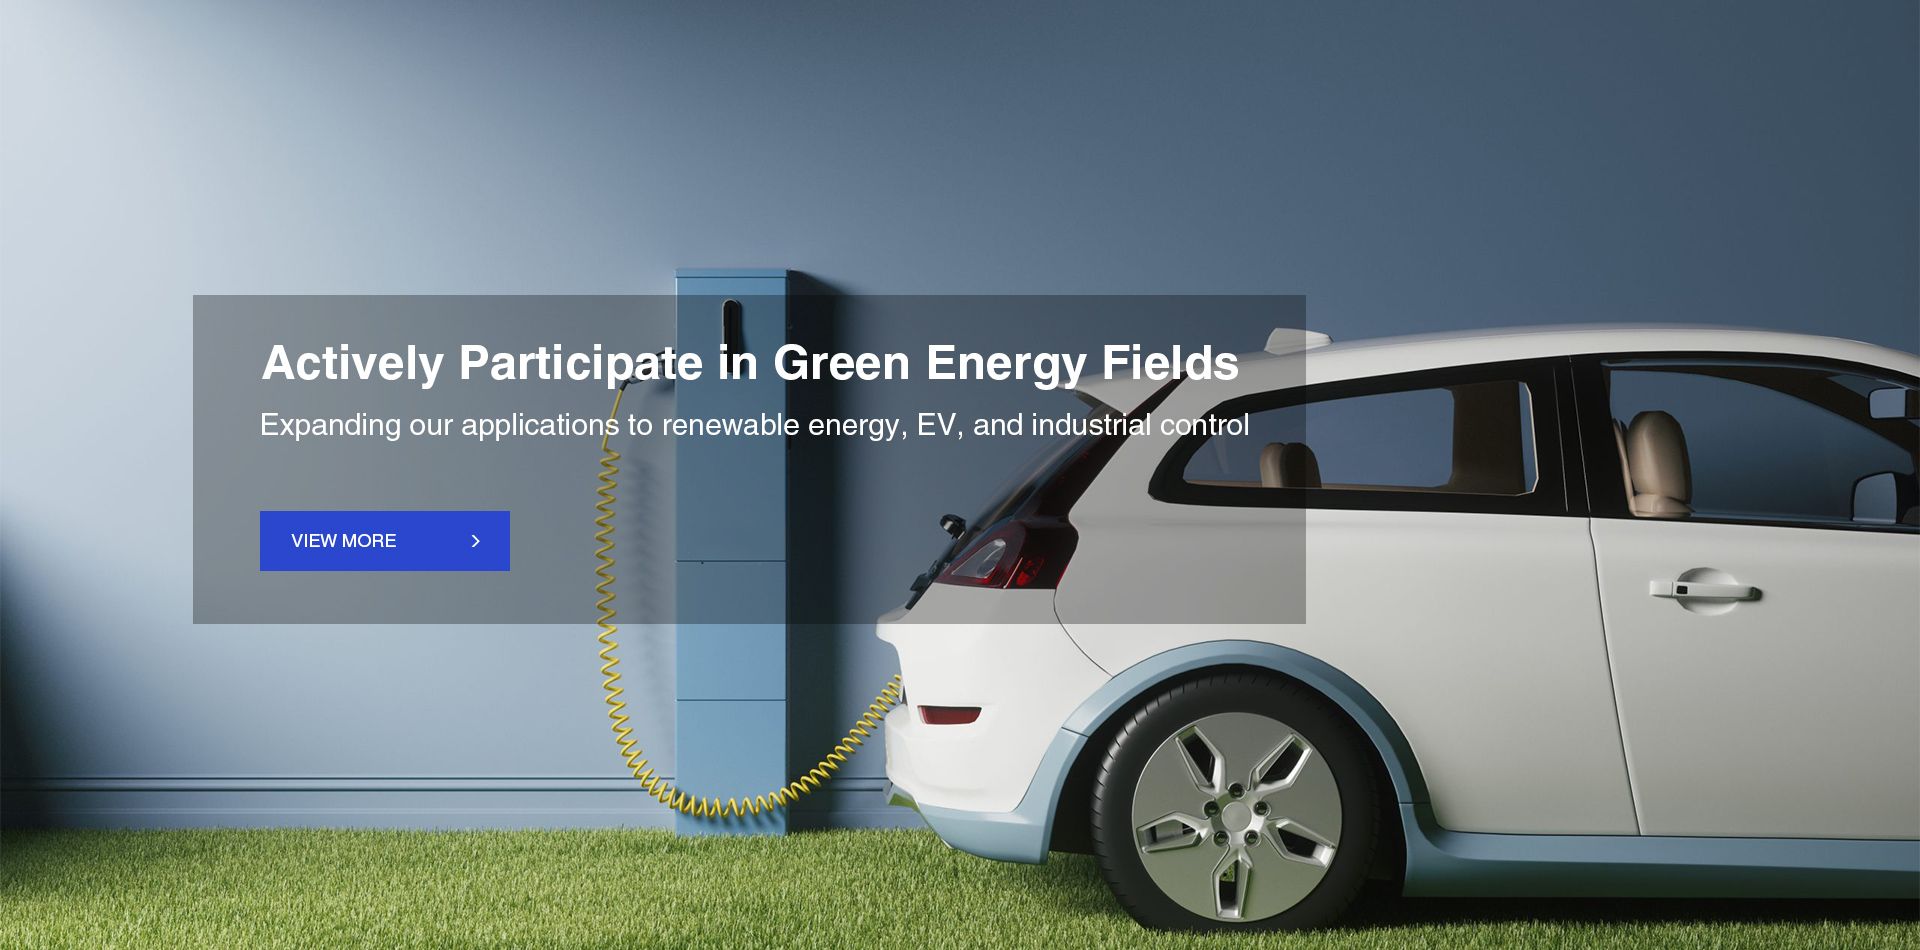 Actively participate in Green energy fields